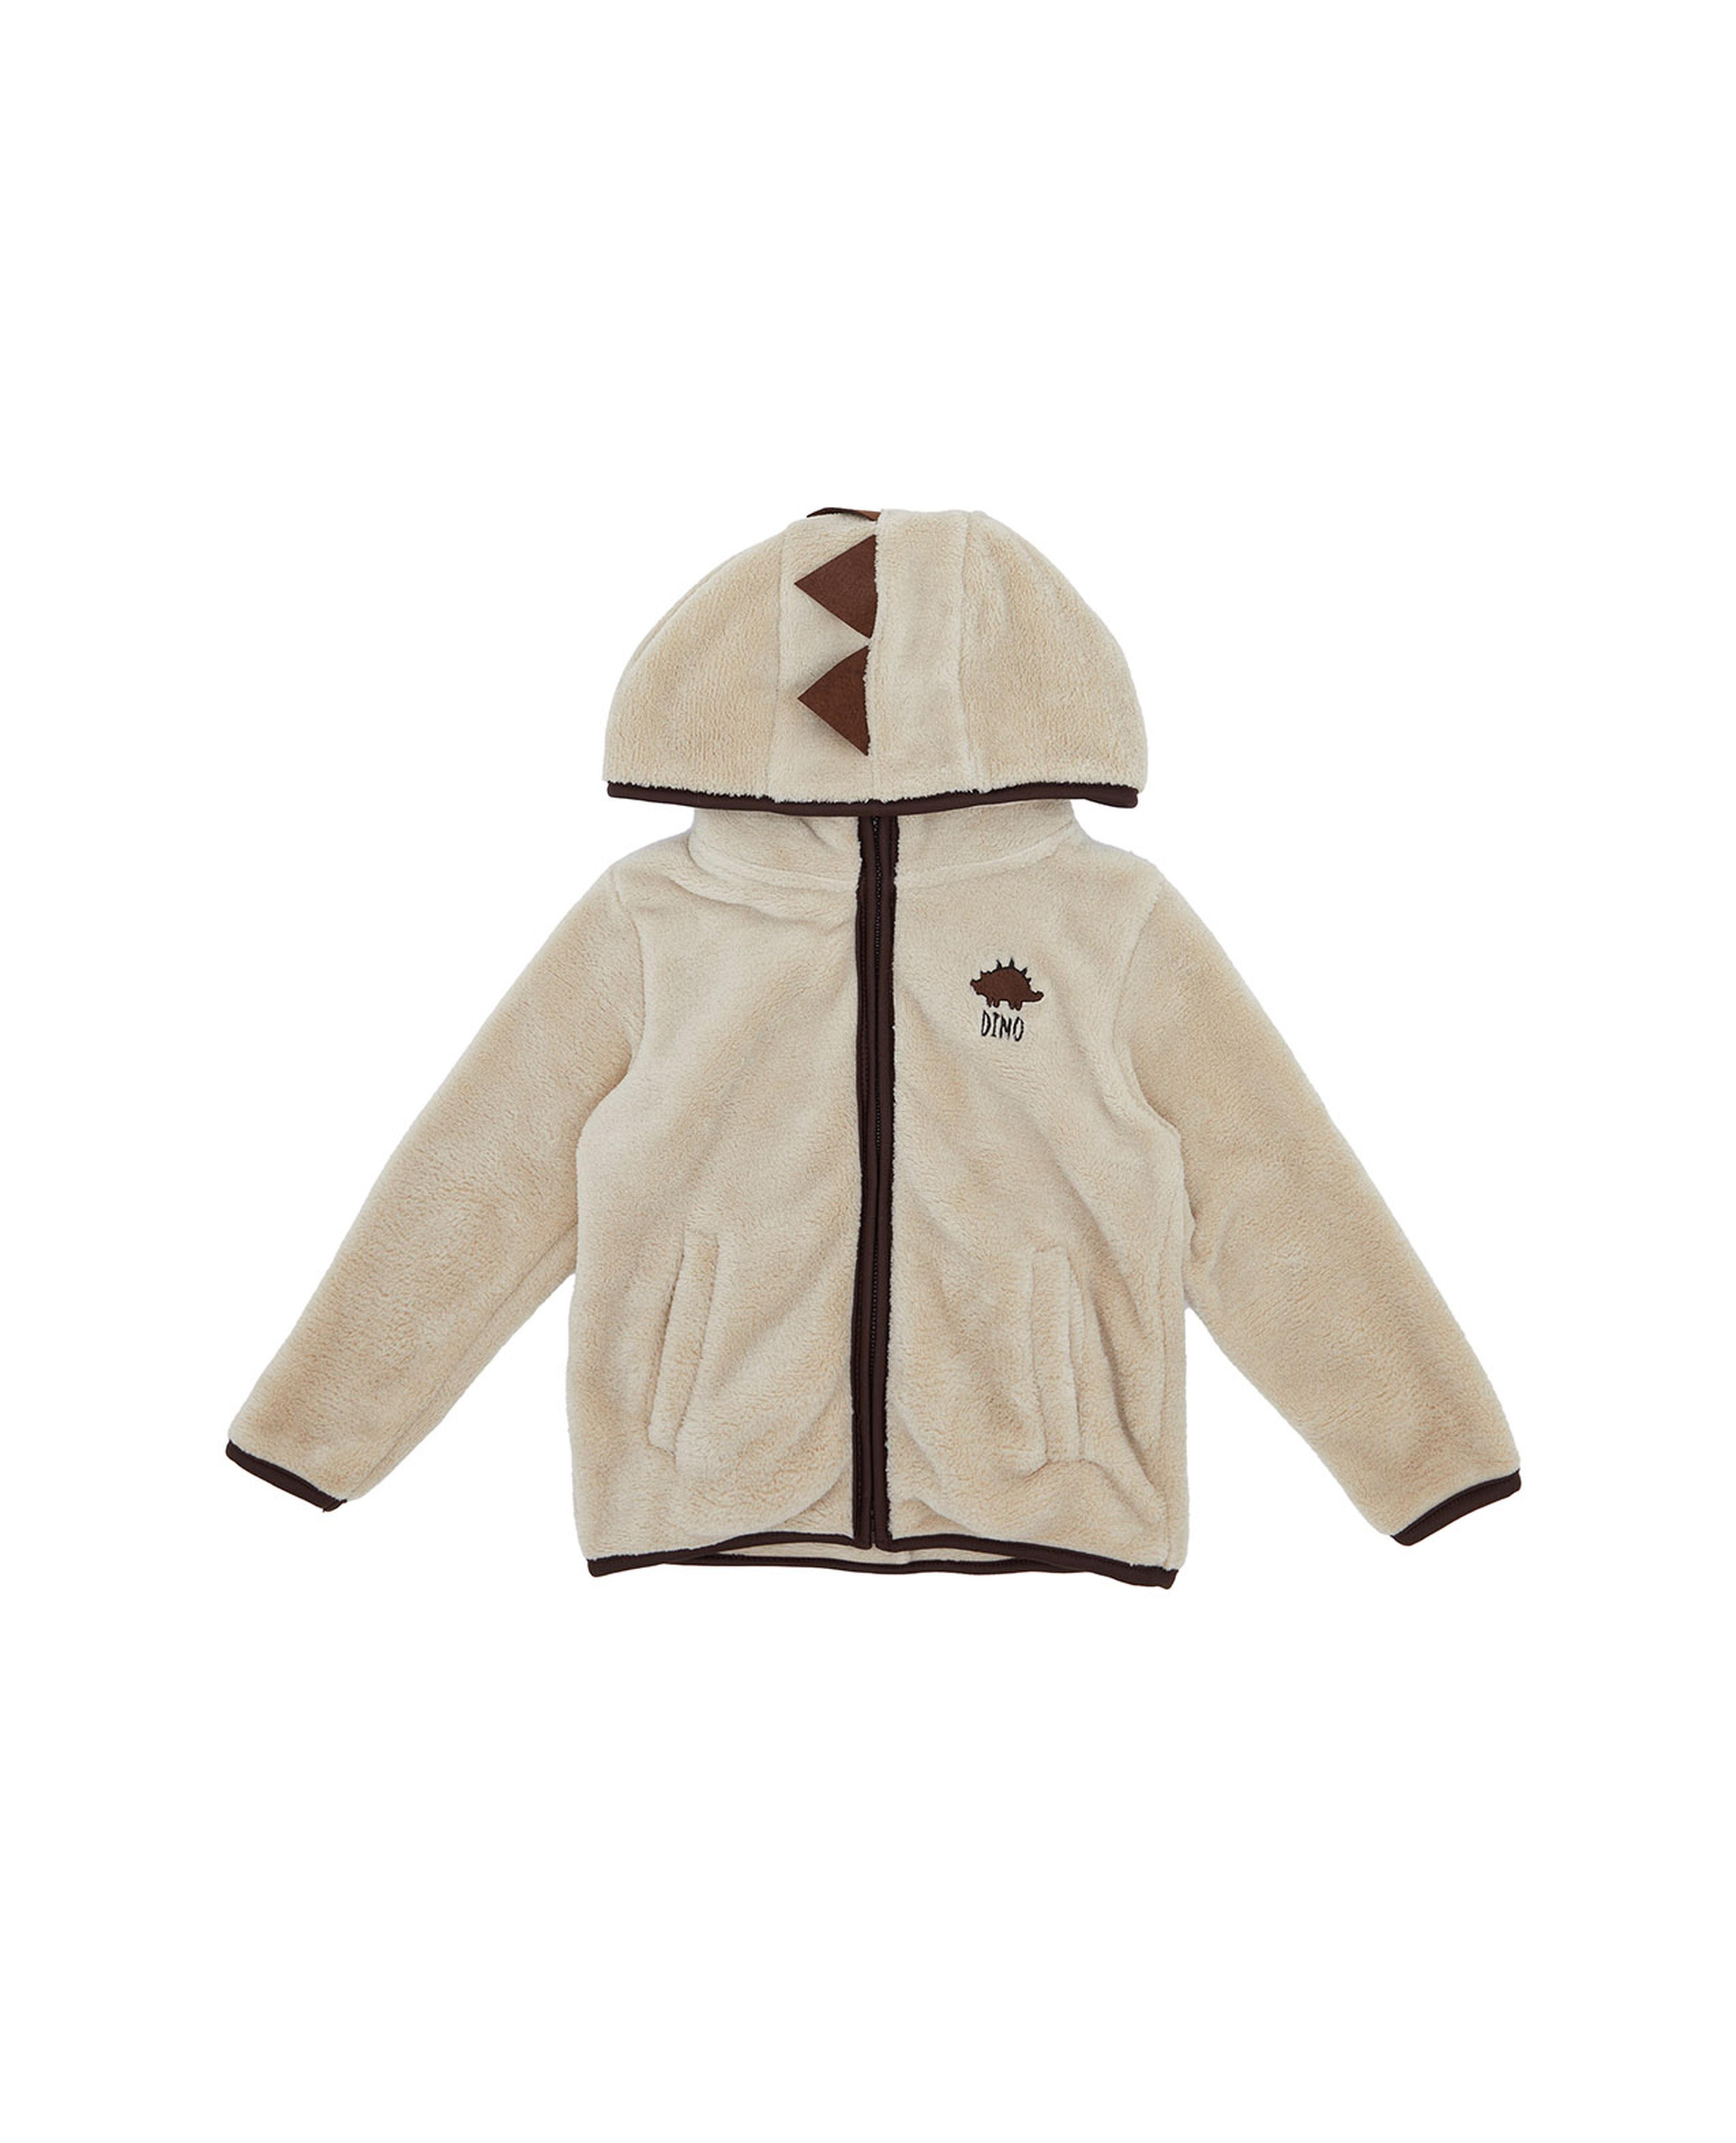 Contrast Trim Hooded Jacket with Zipper Closure